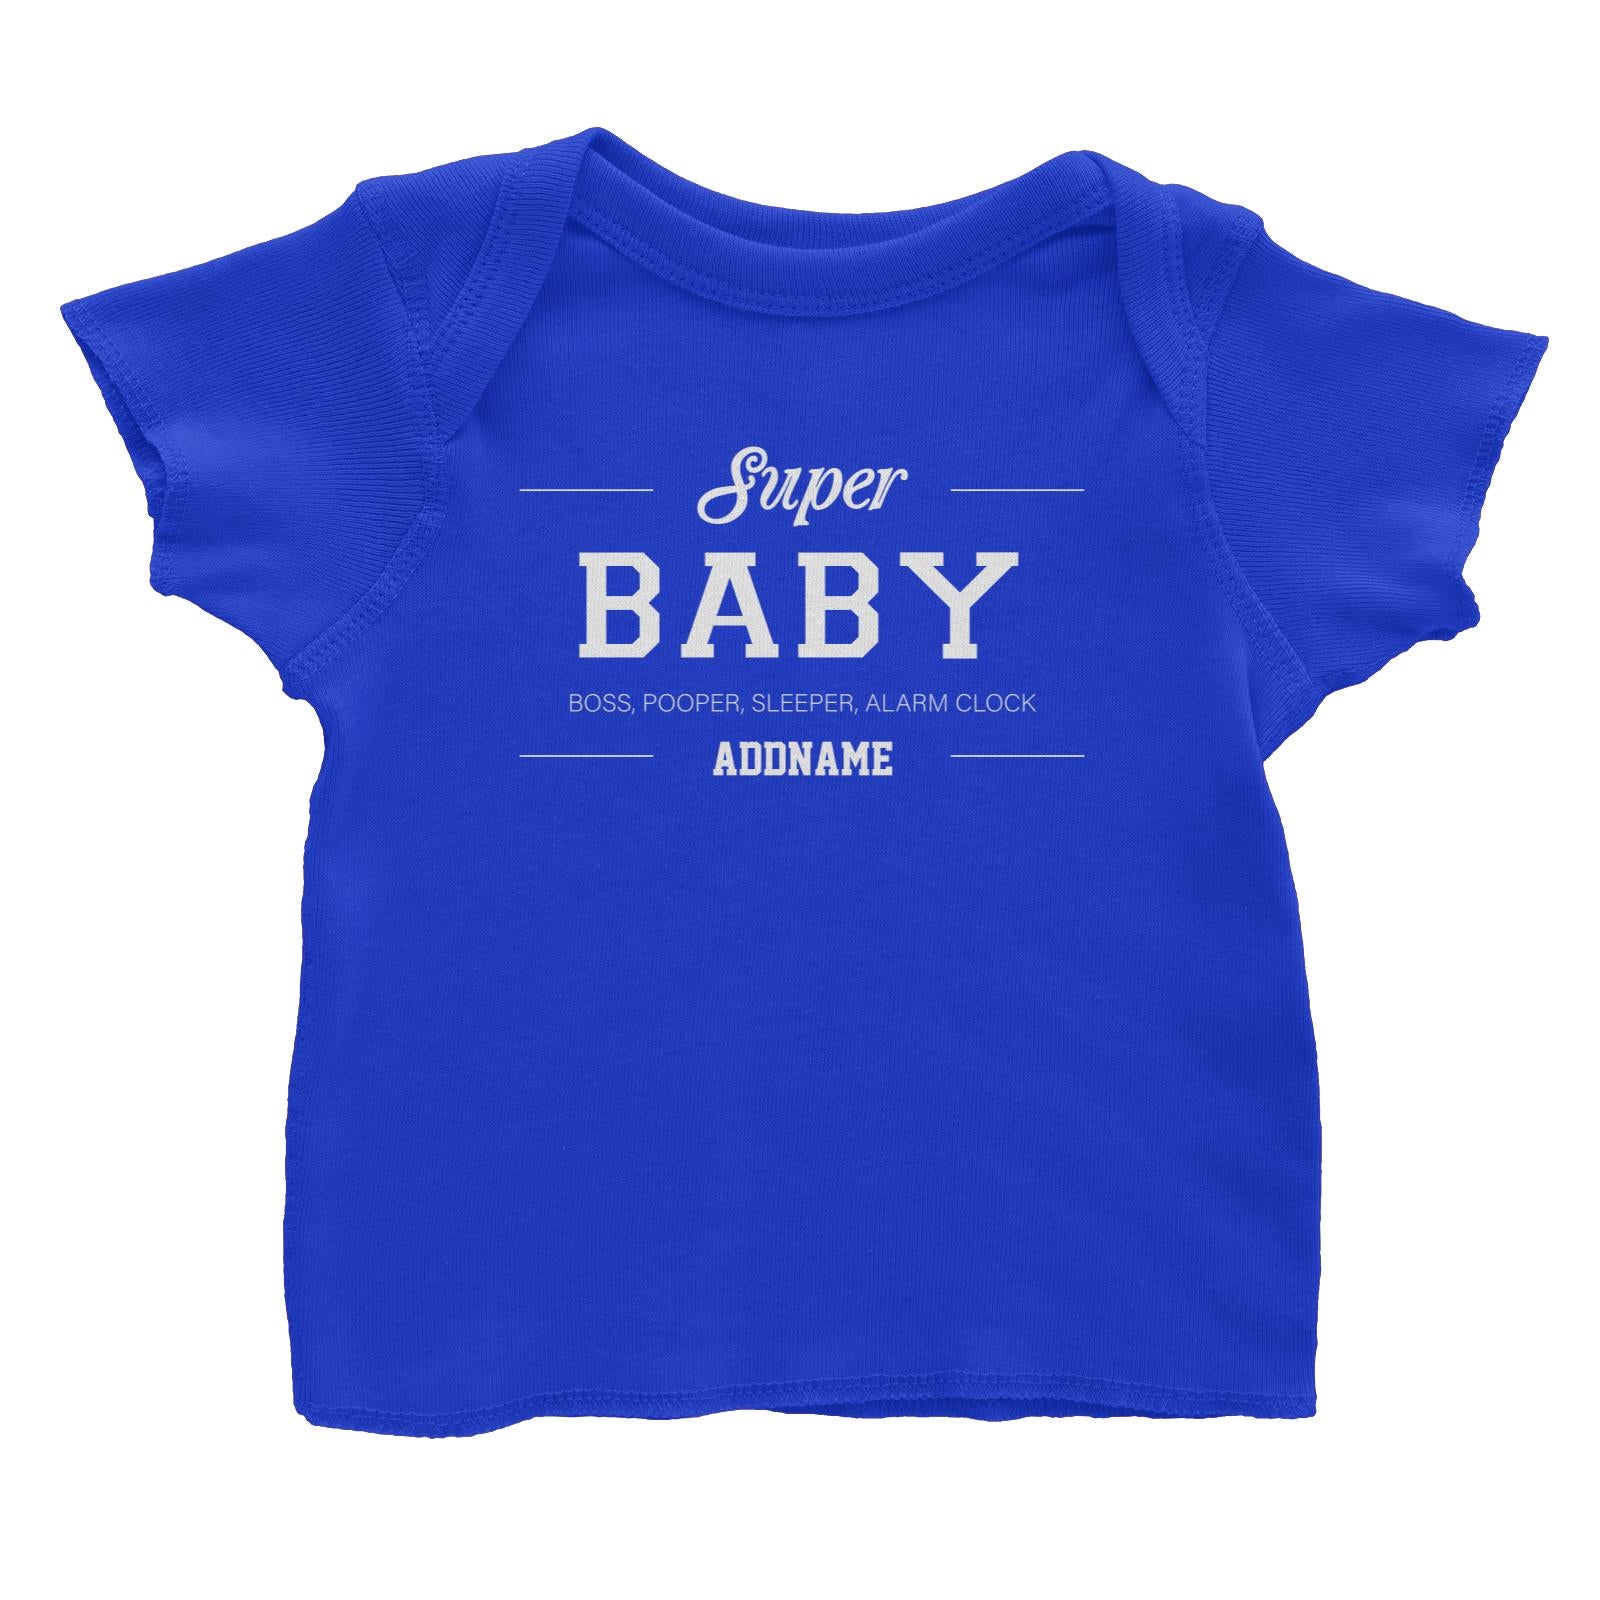 Super Definition Family Super Baby Addname Baby T-Shirt